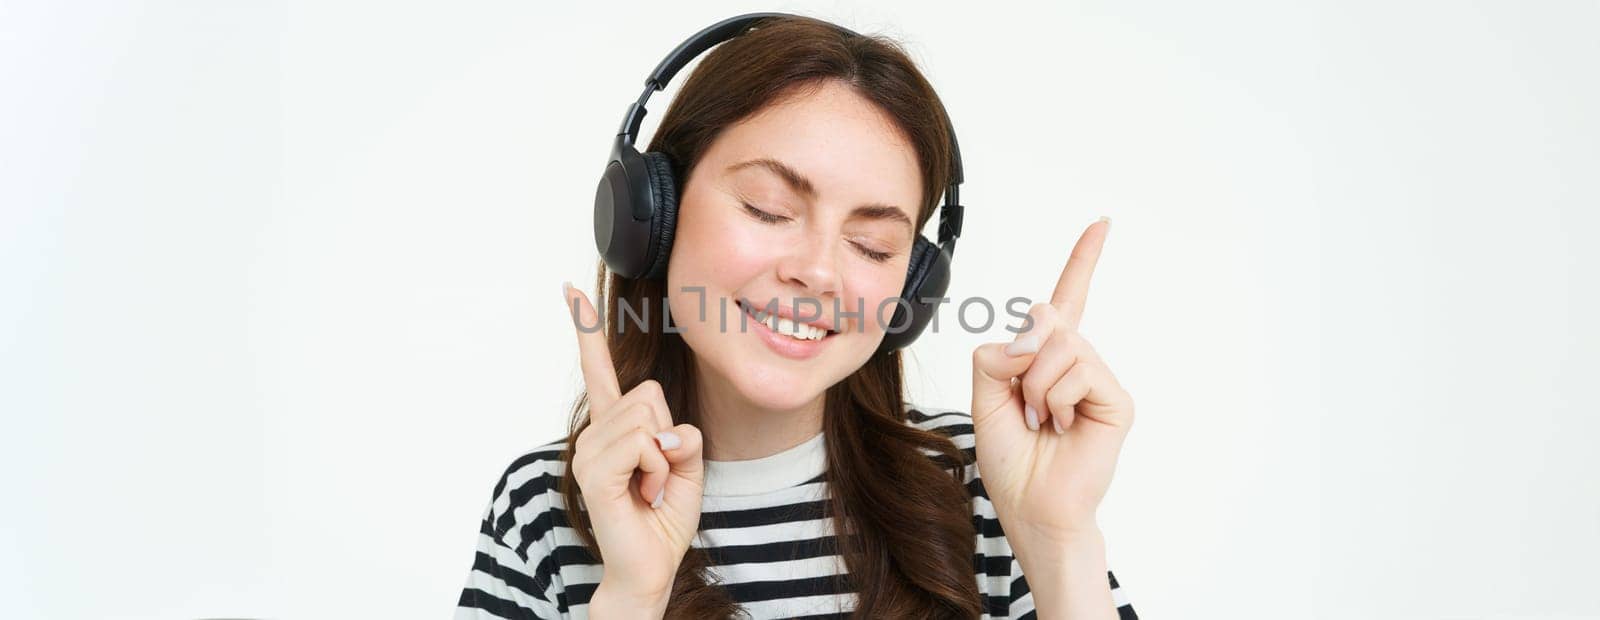 Portrait of happy student girl, listening music in headphones, dancing and pointing fingers at copy space, promo text, isolated against white background.